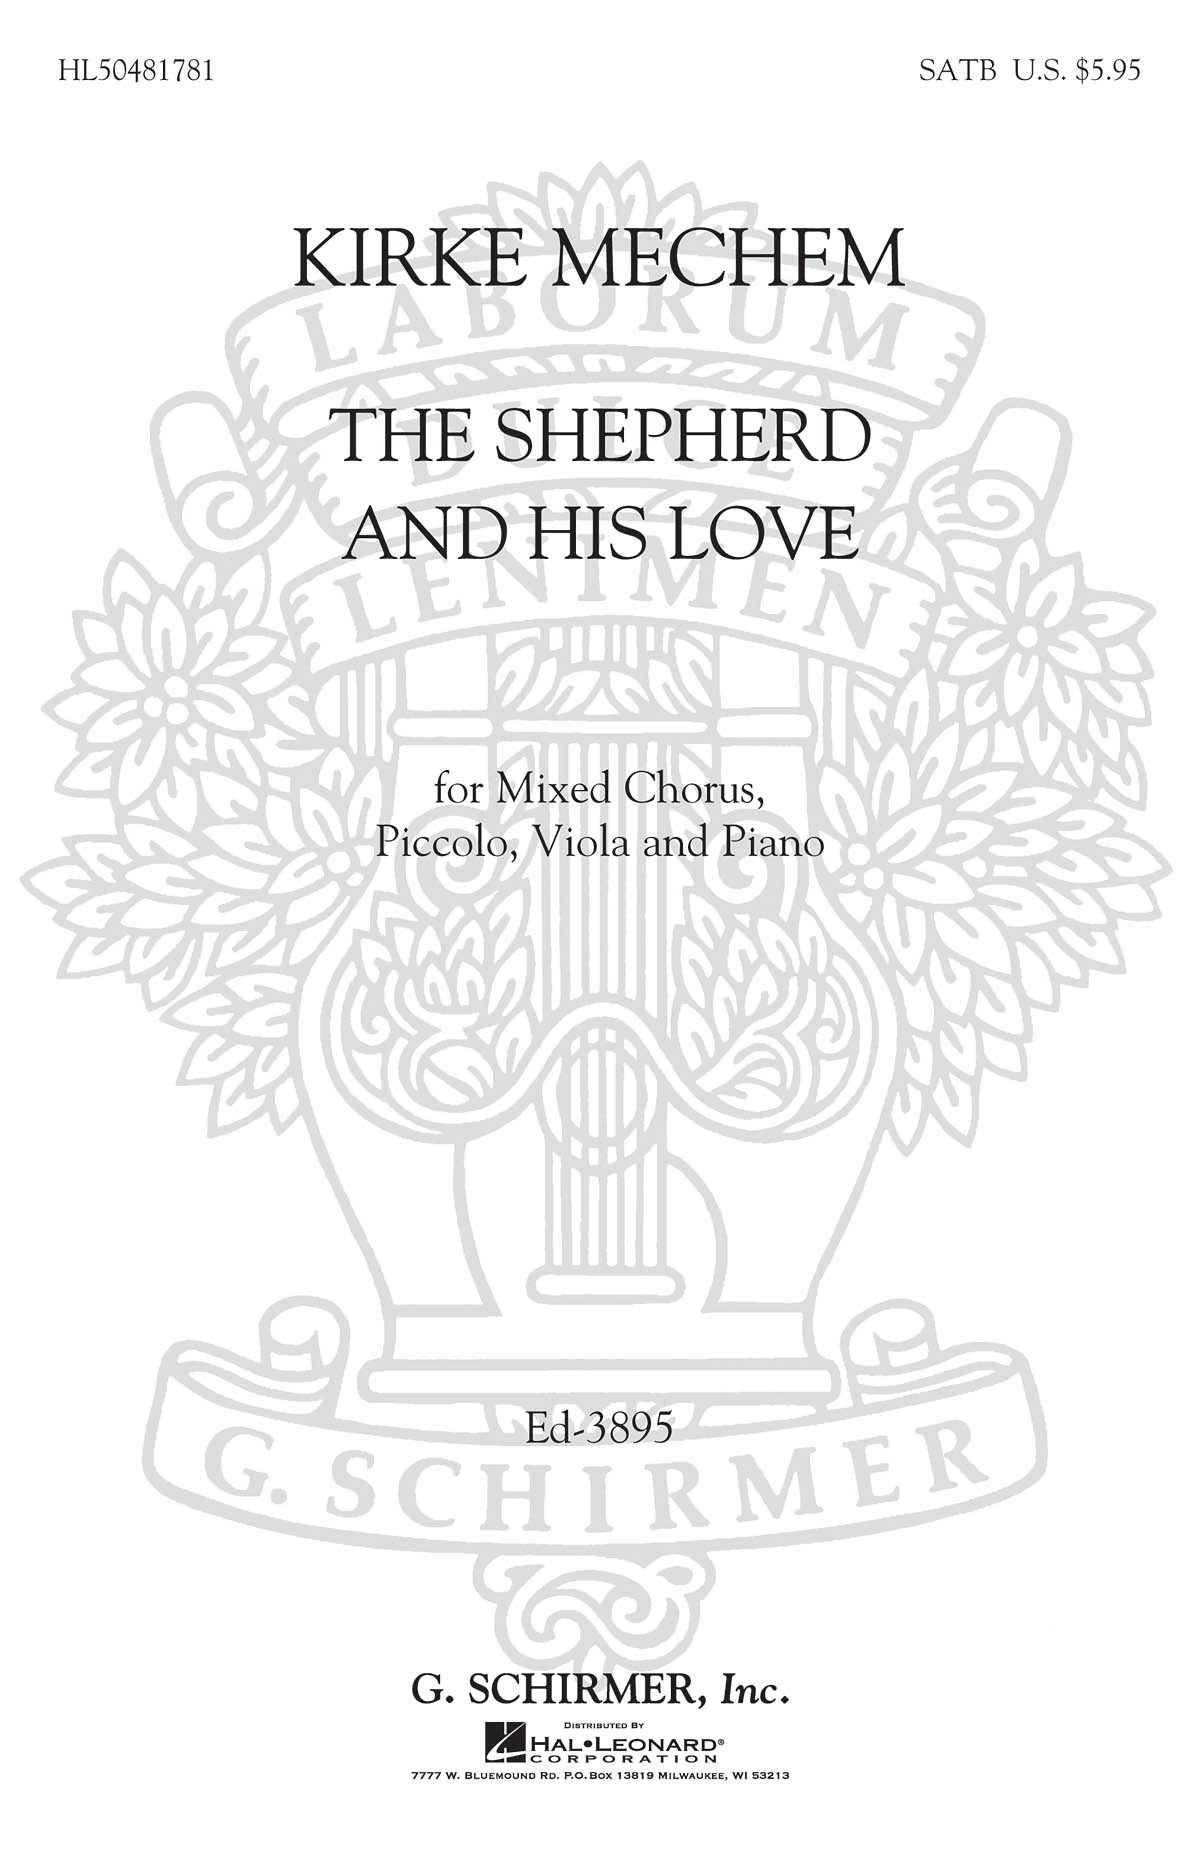 The Shepherd and His Love